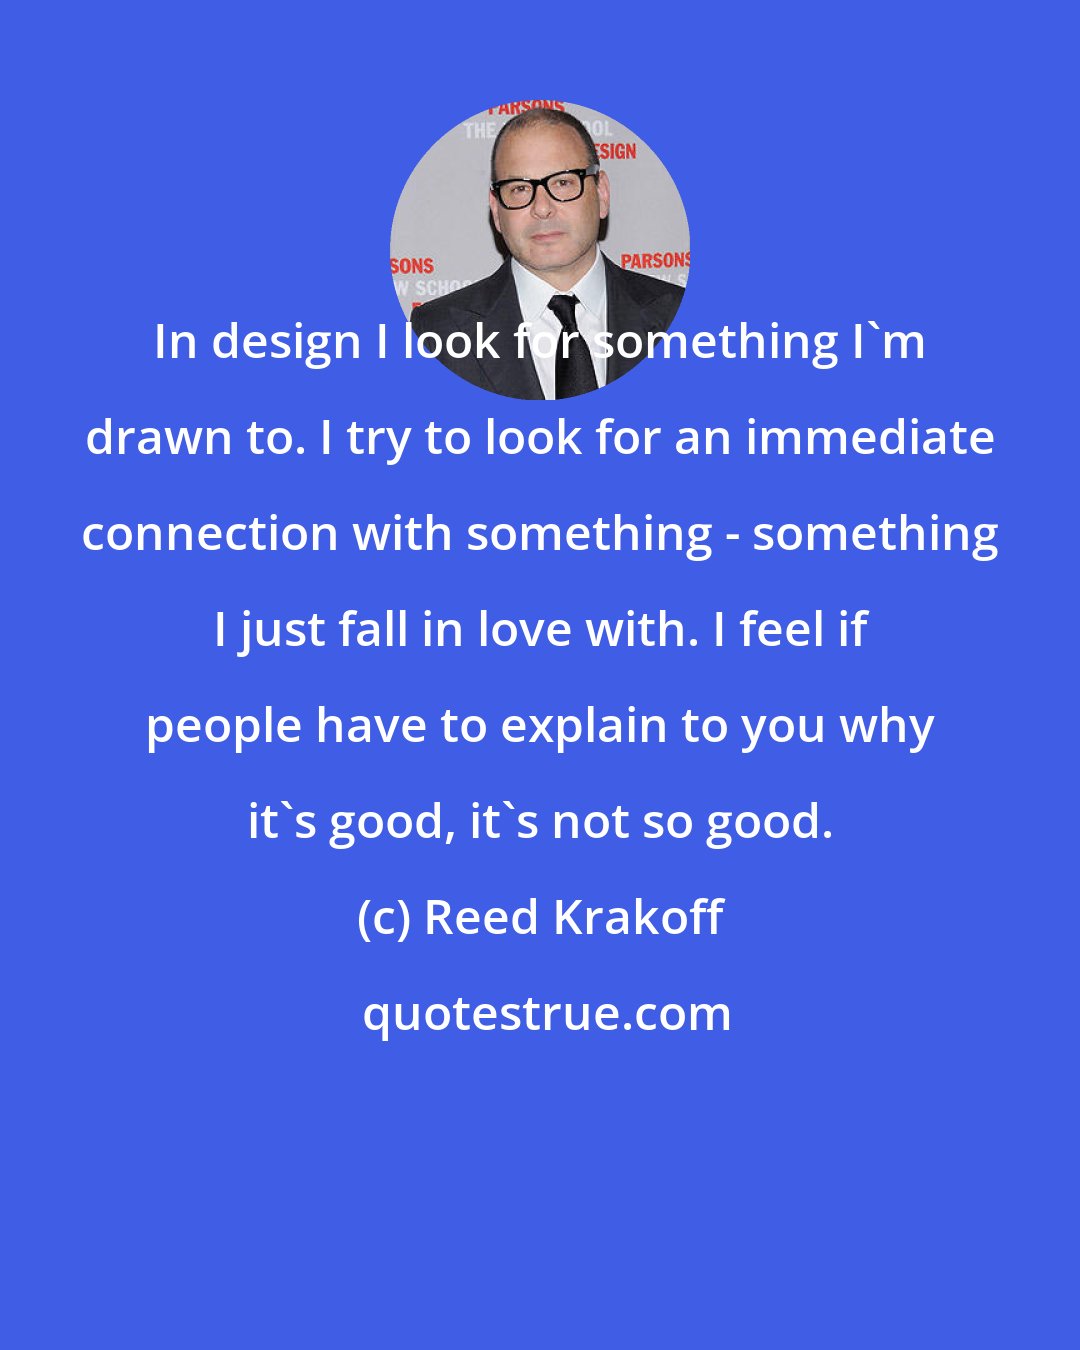 Reed Krakoff: In design I look for something I'm drawn to. I try to look for an immediate connection with something - something I just fall in love with. I feel if people have to explain to you why it's good, it's not so good.